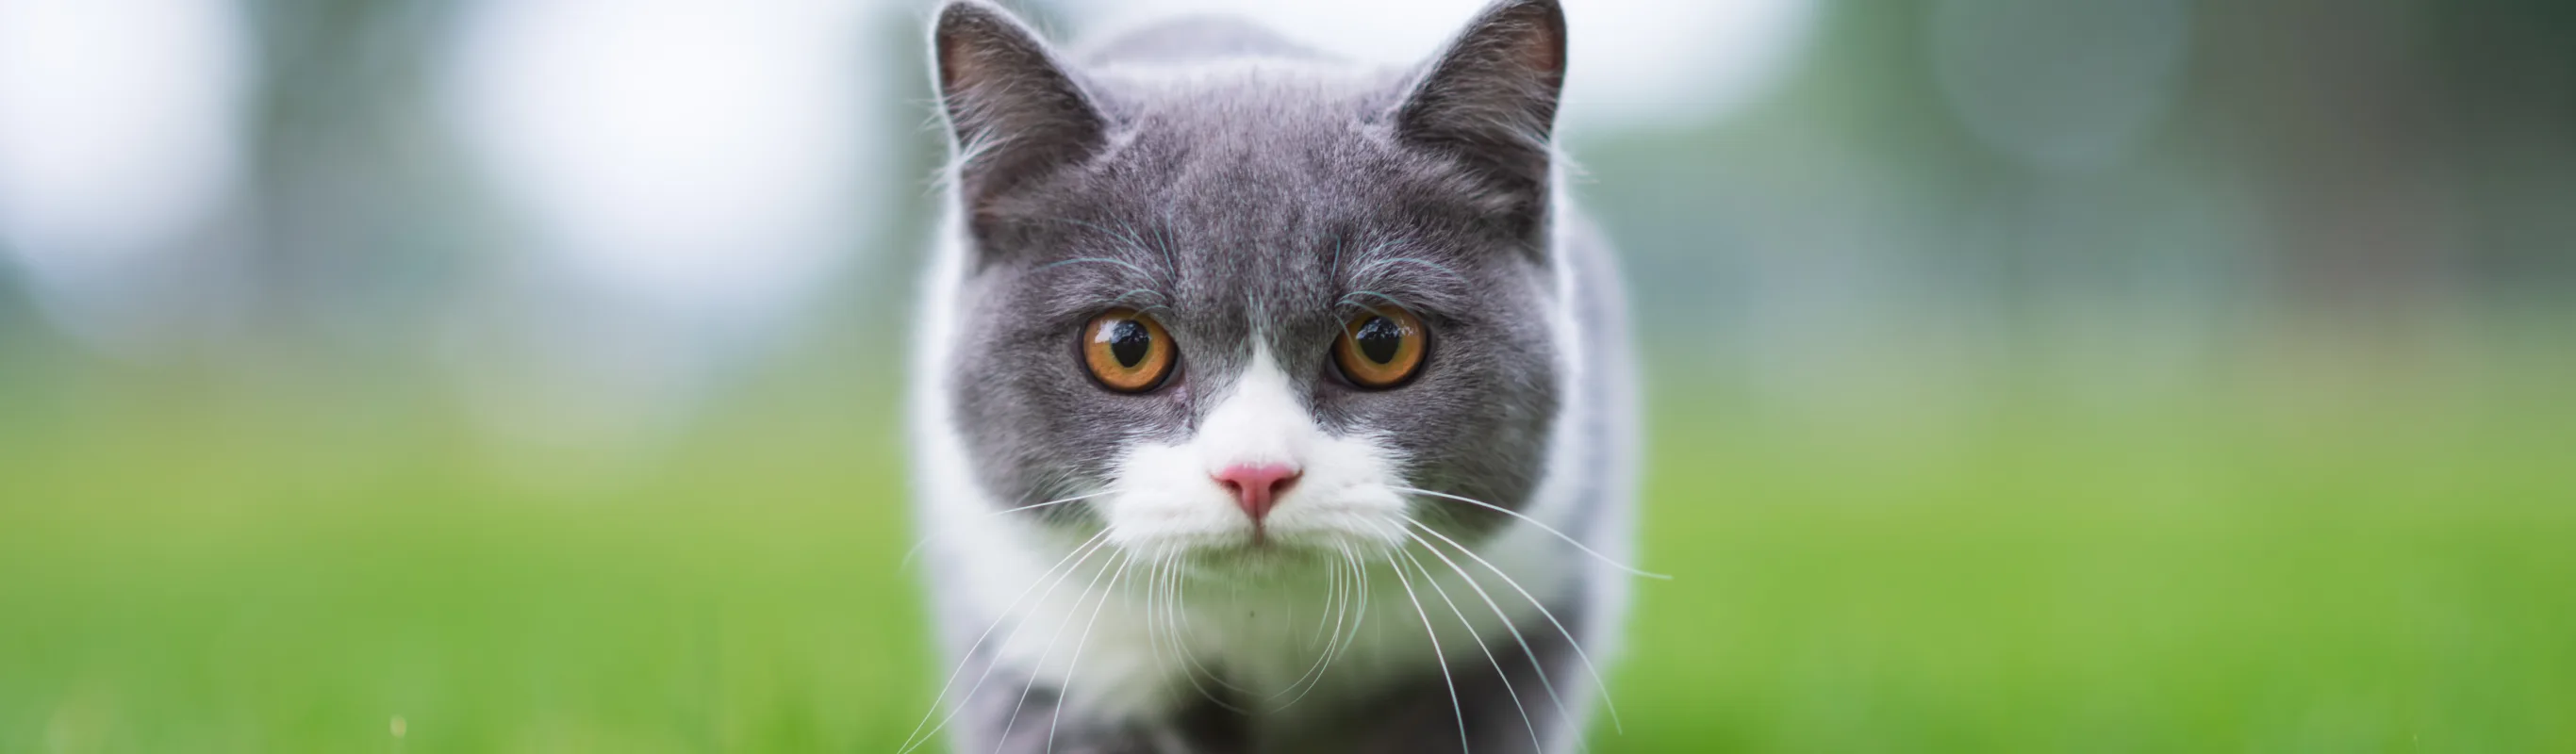 grey and white cat walking in grass